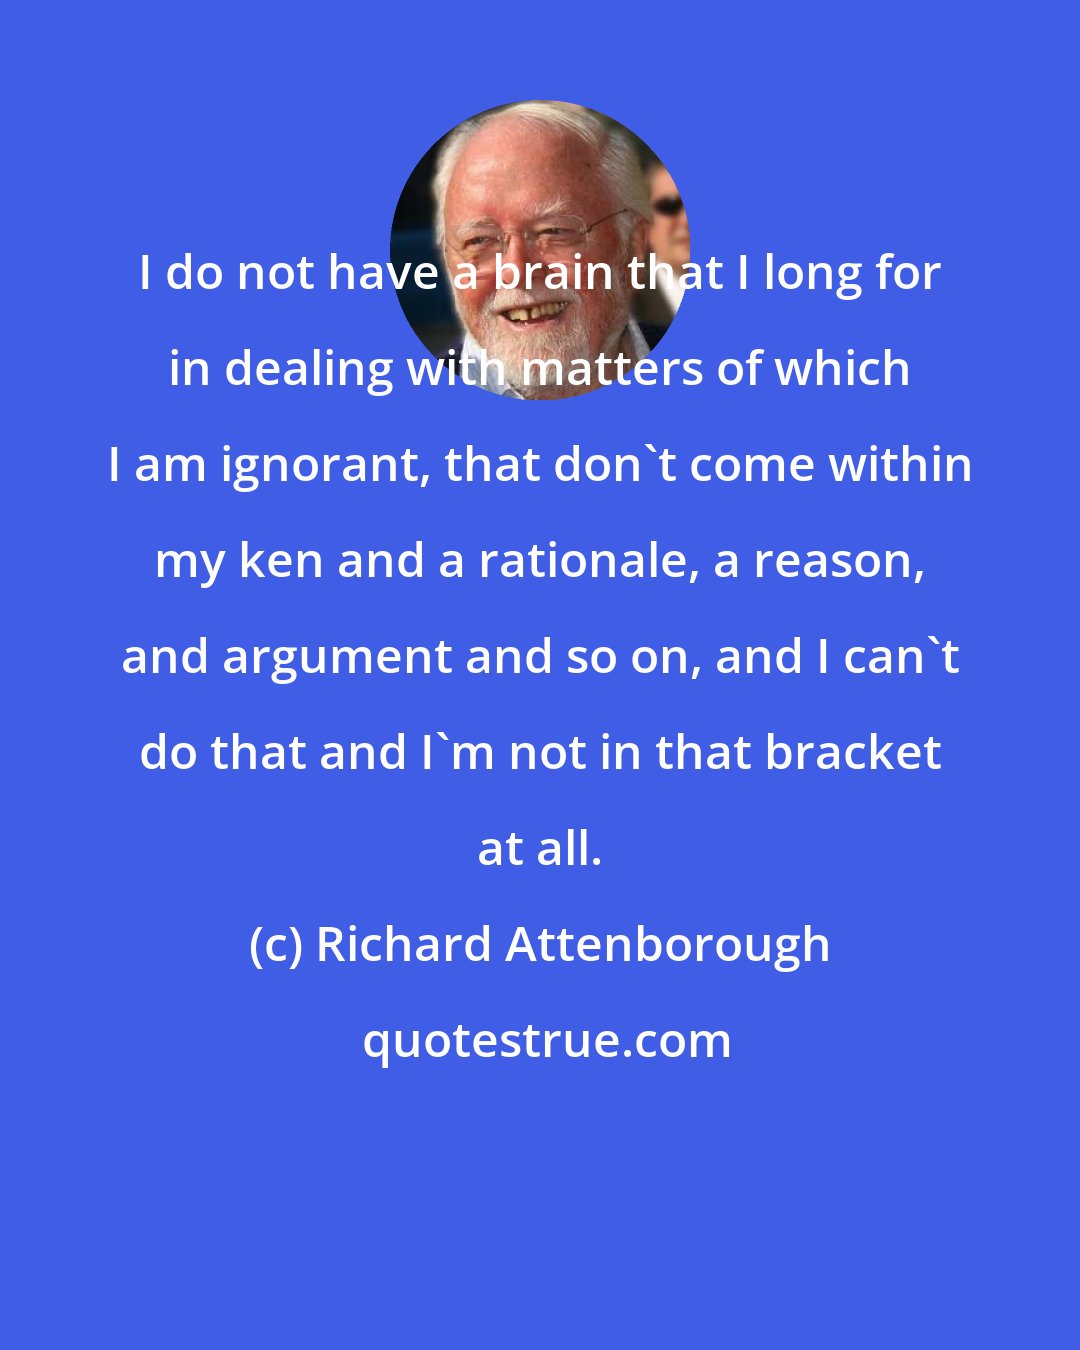 Richard Attenborough: I do not have a brain that I long for in dealing with matters of which I am ignorant, that don't come within my ken and a rationale, a reason, and argument and so on, and I can't do that and I'm not in that bracket at all.